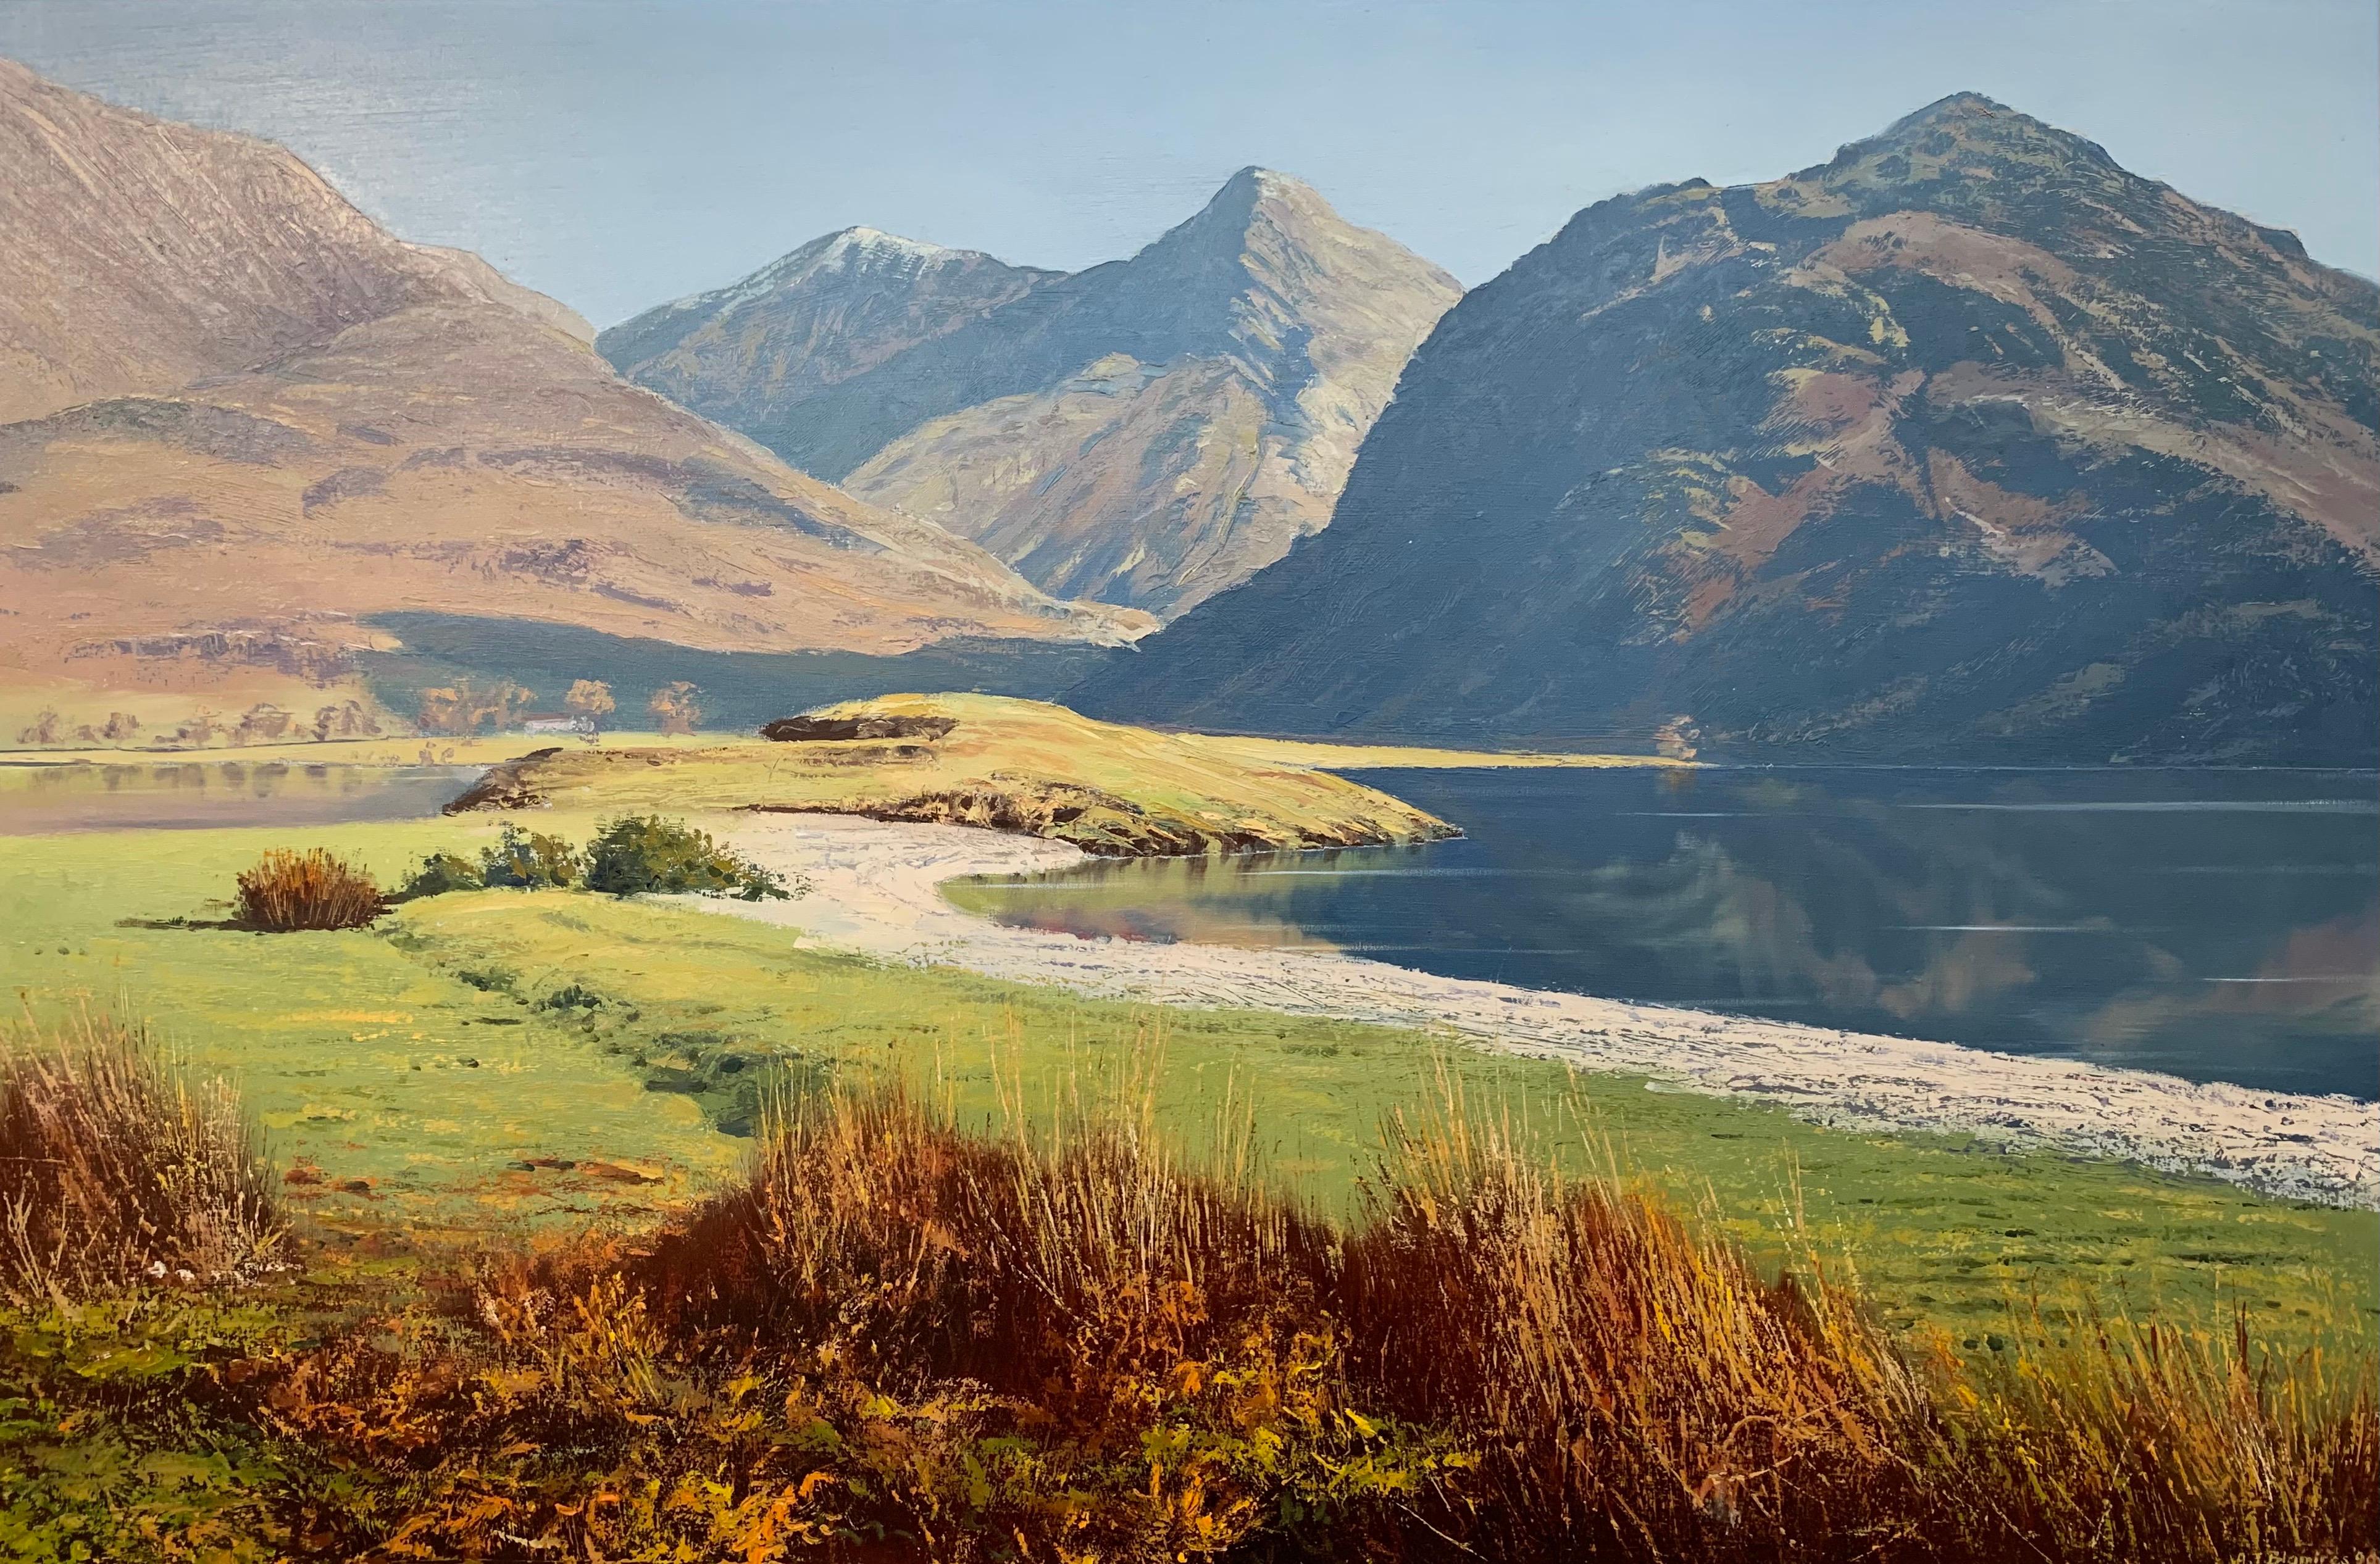 Crummock Water in the English Lake District by Modern British Landscape Artist Arthur Terry Blamires (b. 1930)

Art measures 30 x 20 inches
Frame measures 35 x 25 inches

Crag Hill, Whiteless Pyke and Rannerdale Knots from Low Ling Crag, Crummock